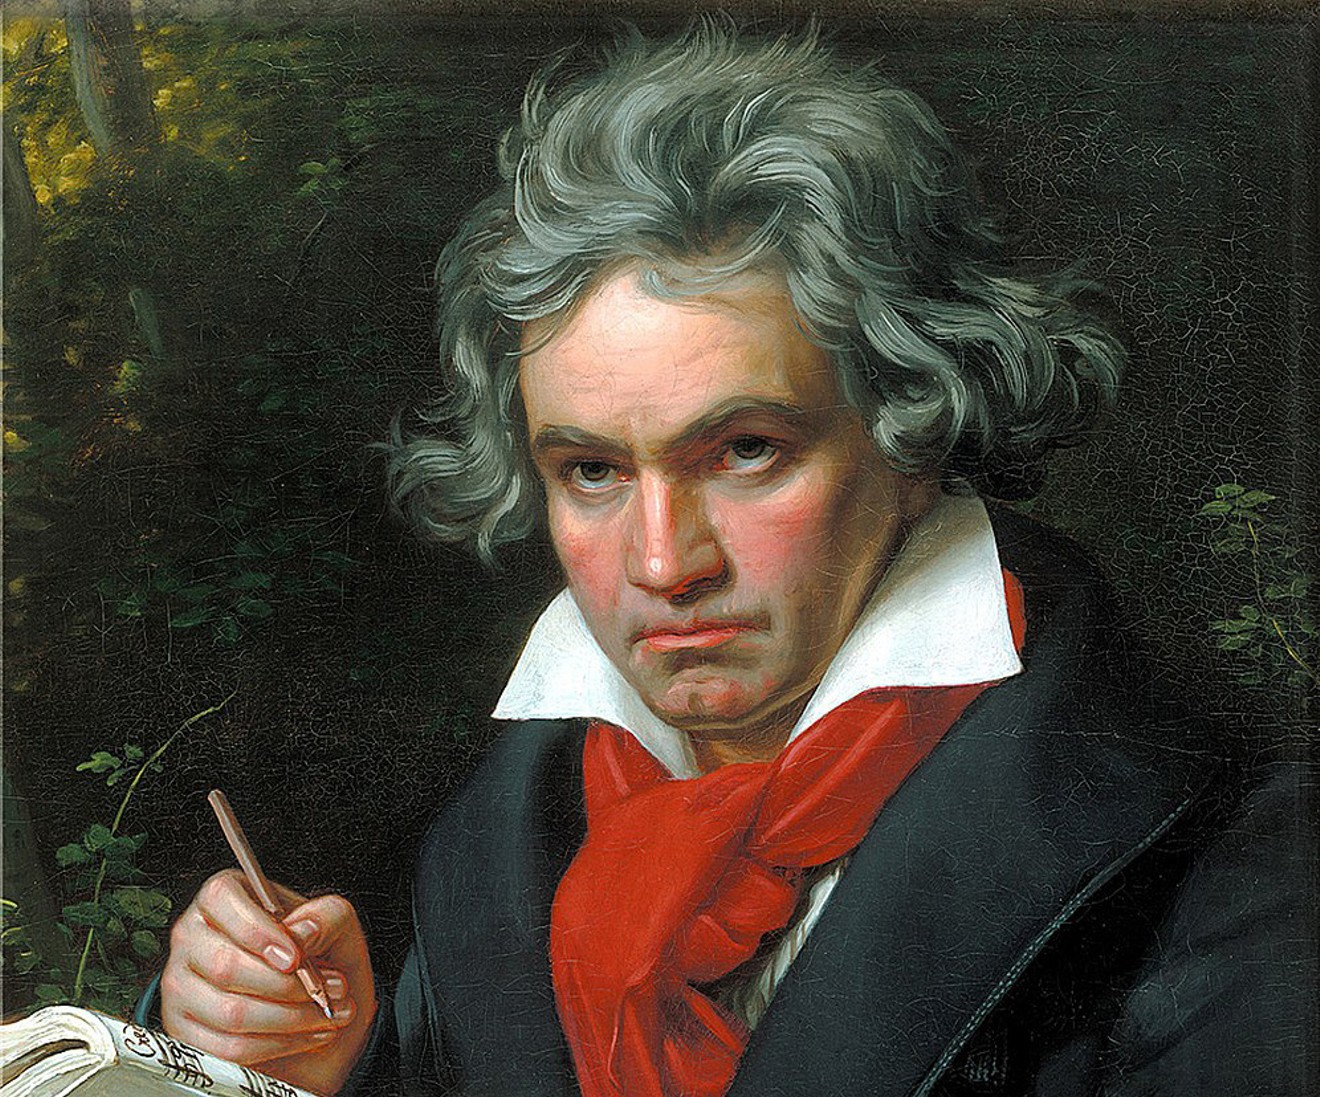 Today is Beethoven's 250th birthday.